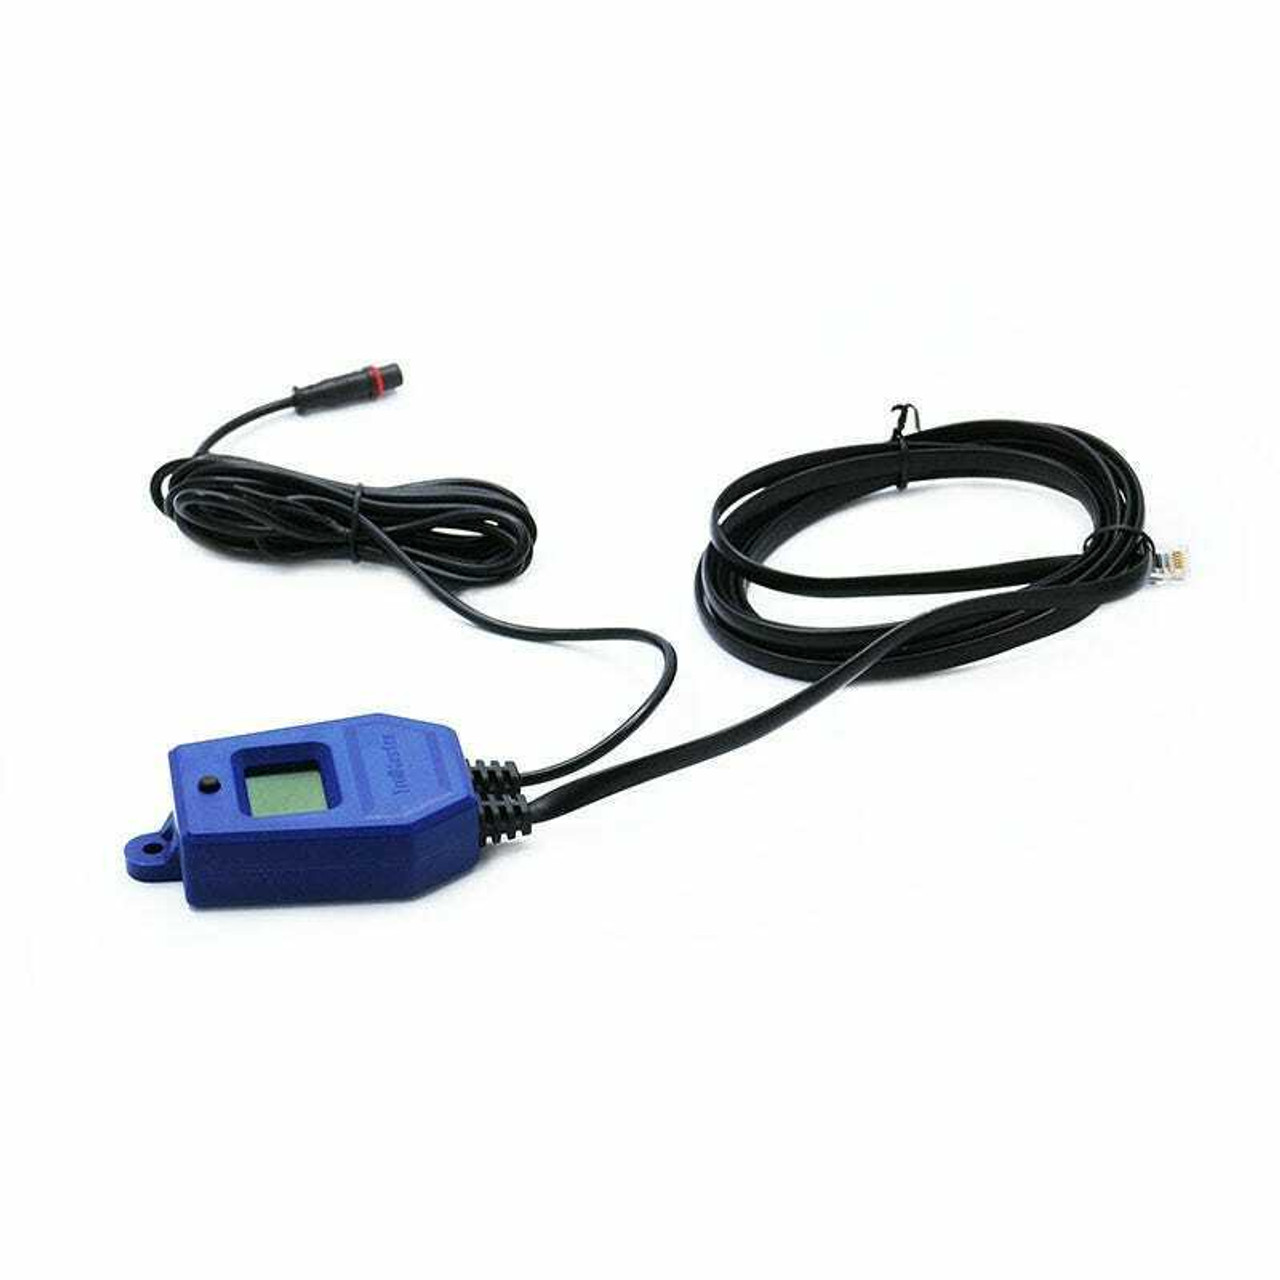 Aqua-X Water Detector + Touch Spot for watering confirmation - 1